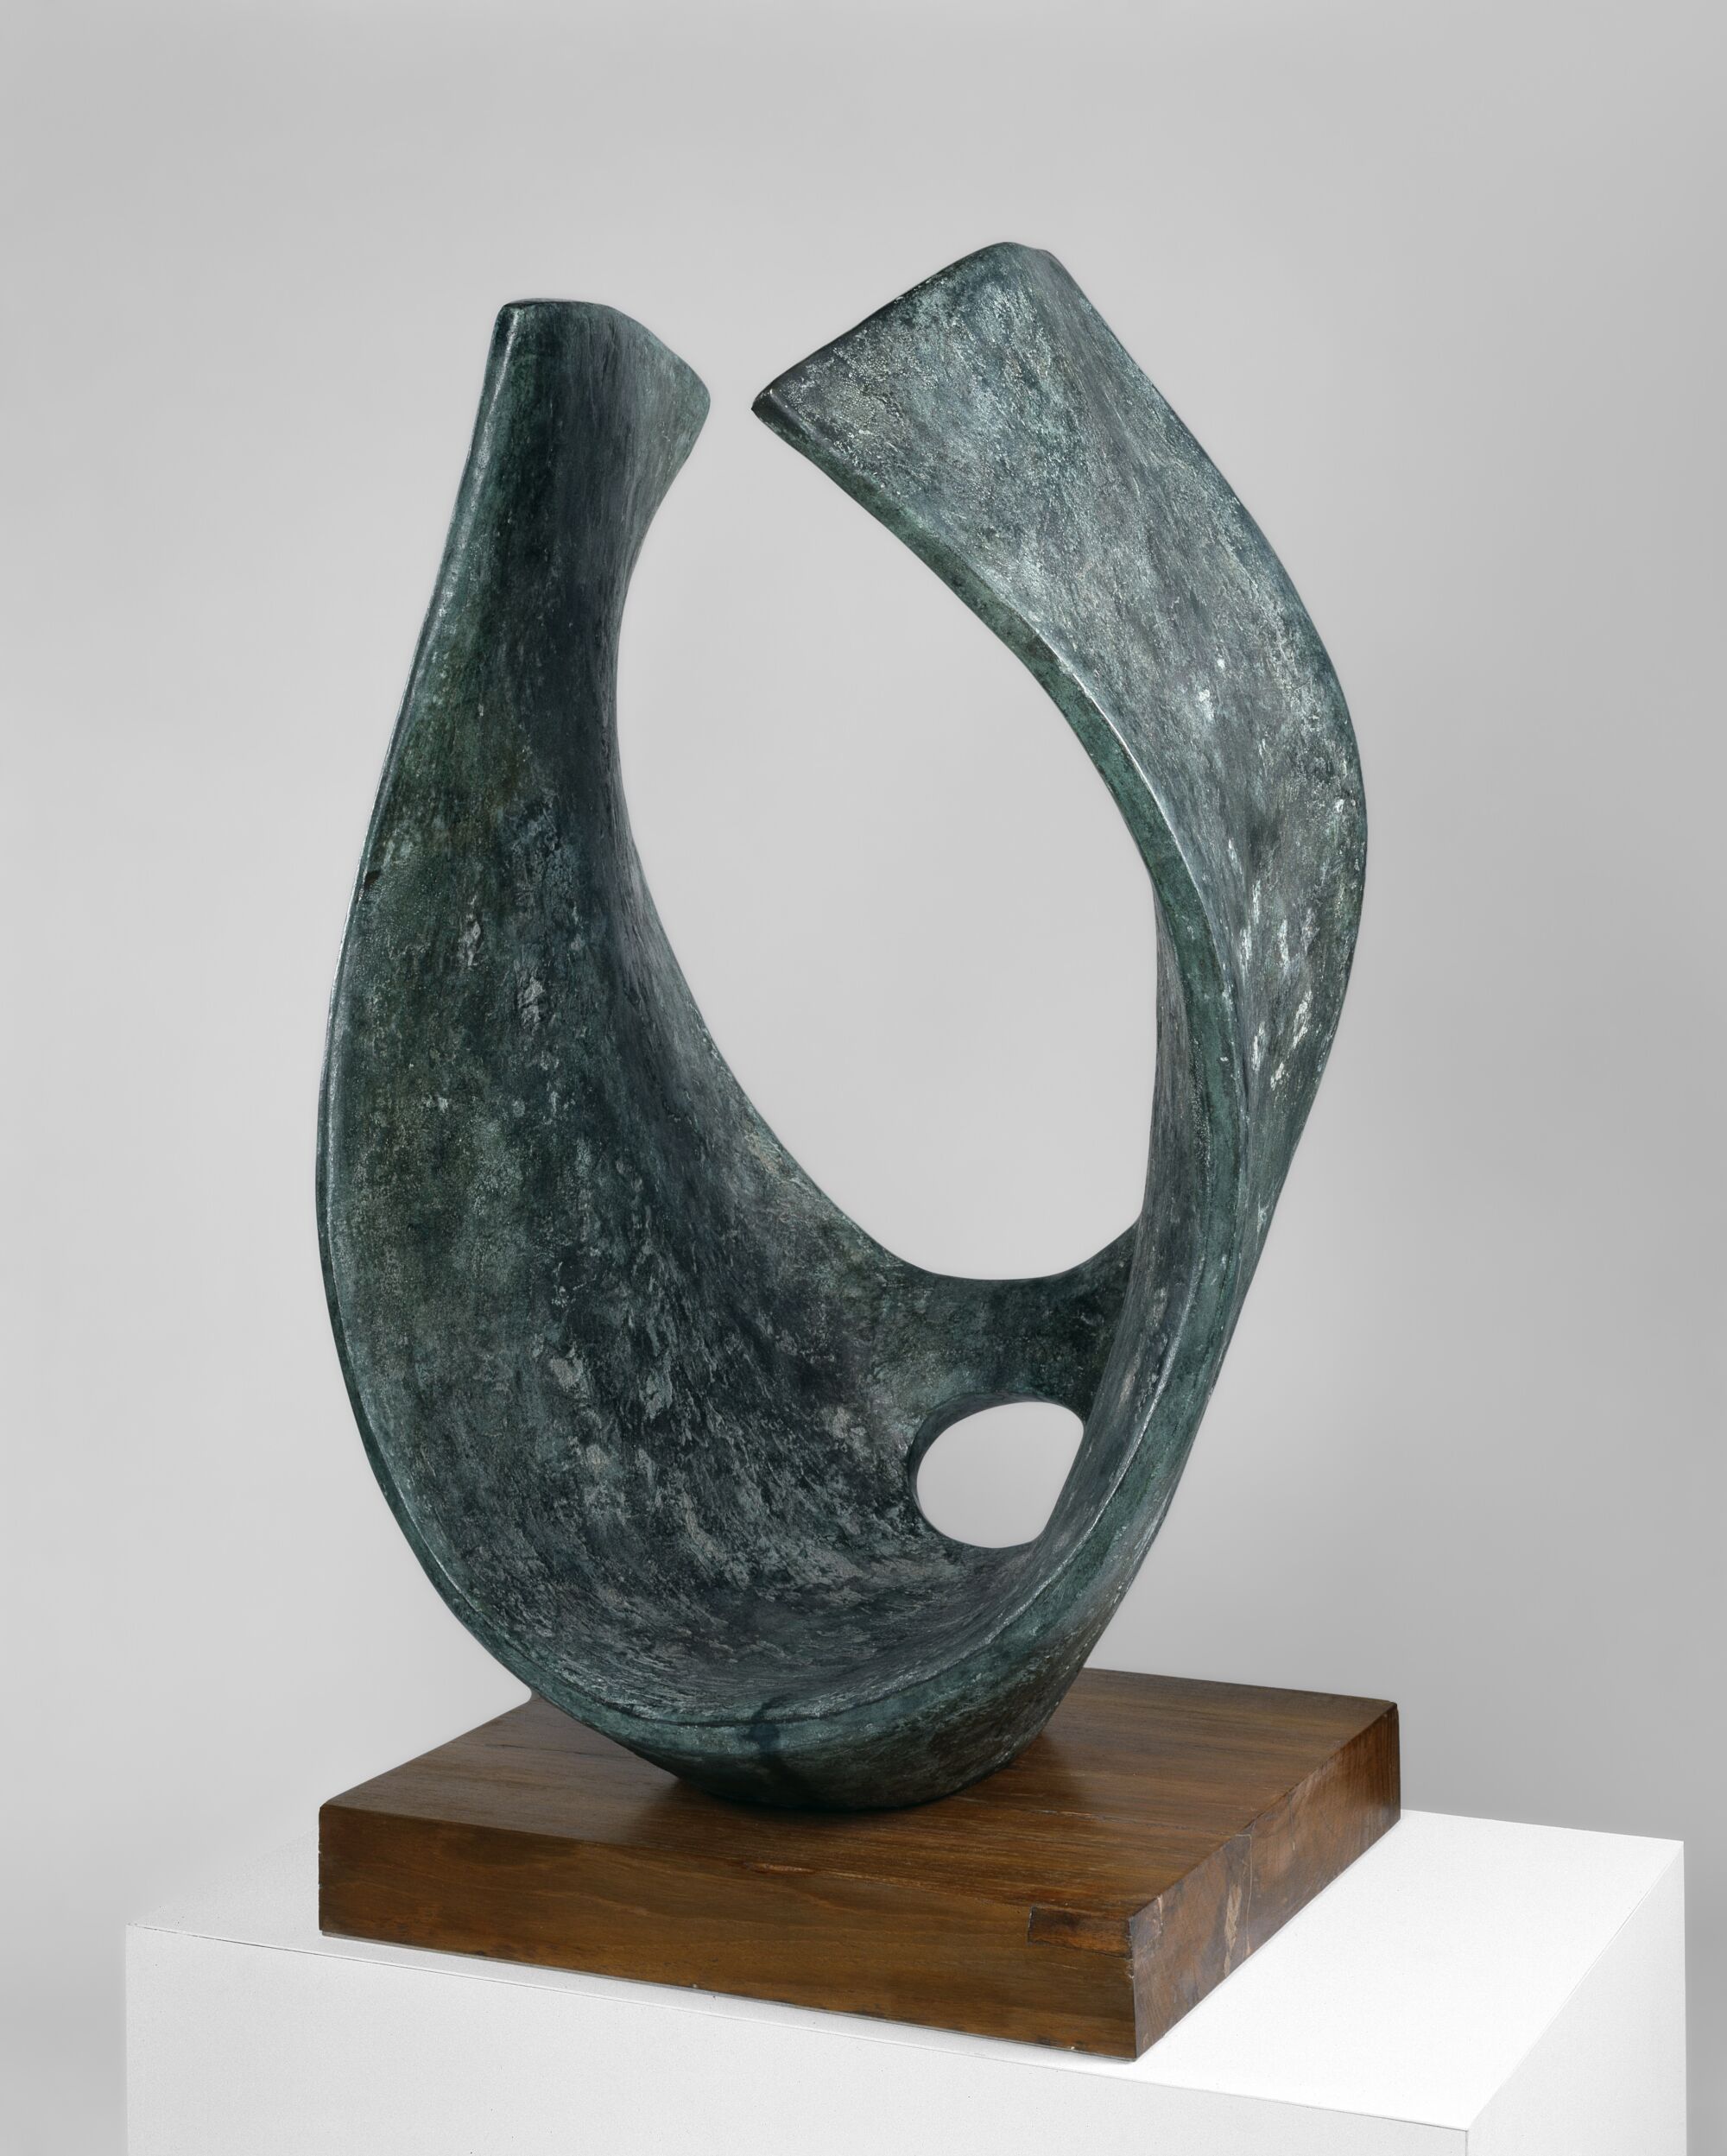 The Wick - Barbara Hepworth - Curved Form (Trevalgan) 1956. Courtesy of the British Council Collection. Photo © The British Council